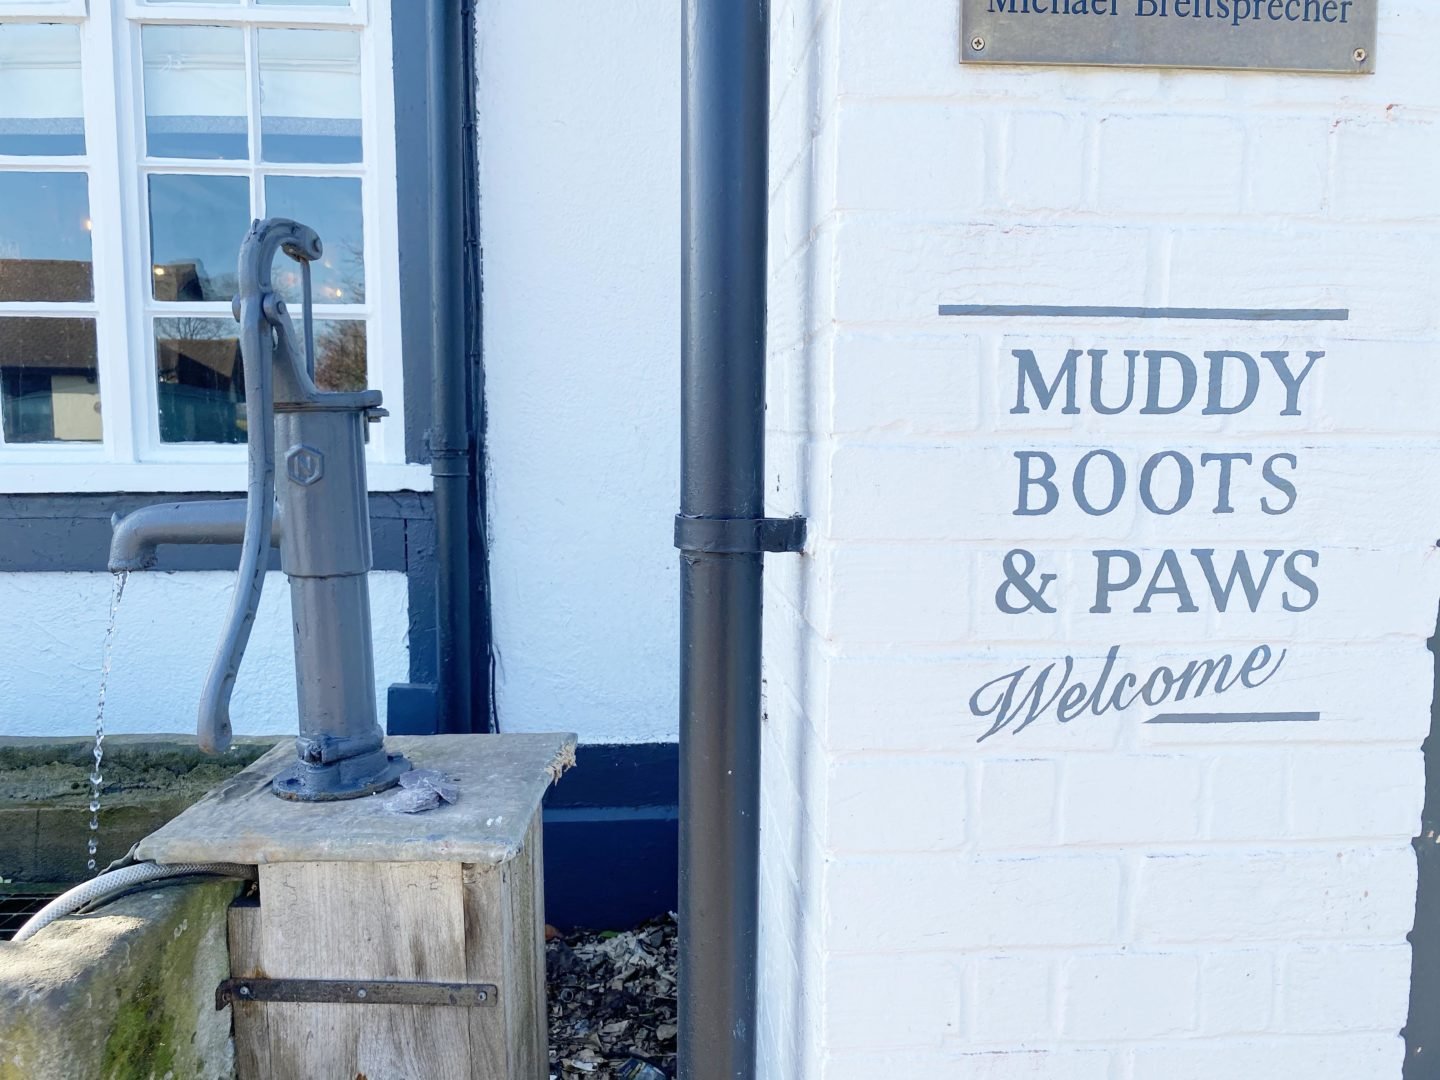 Dogs are welcome at the kings Head Pub to sit in the lounge area. Muddy boots and paws welcome sign